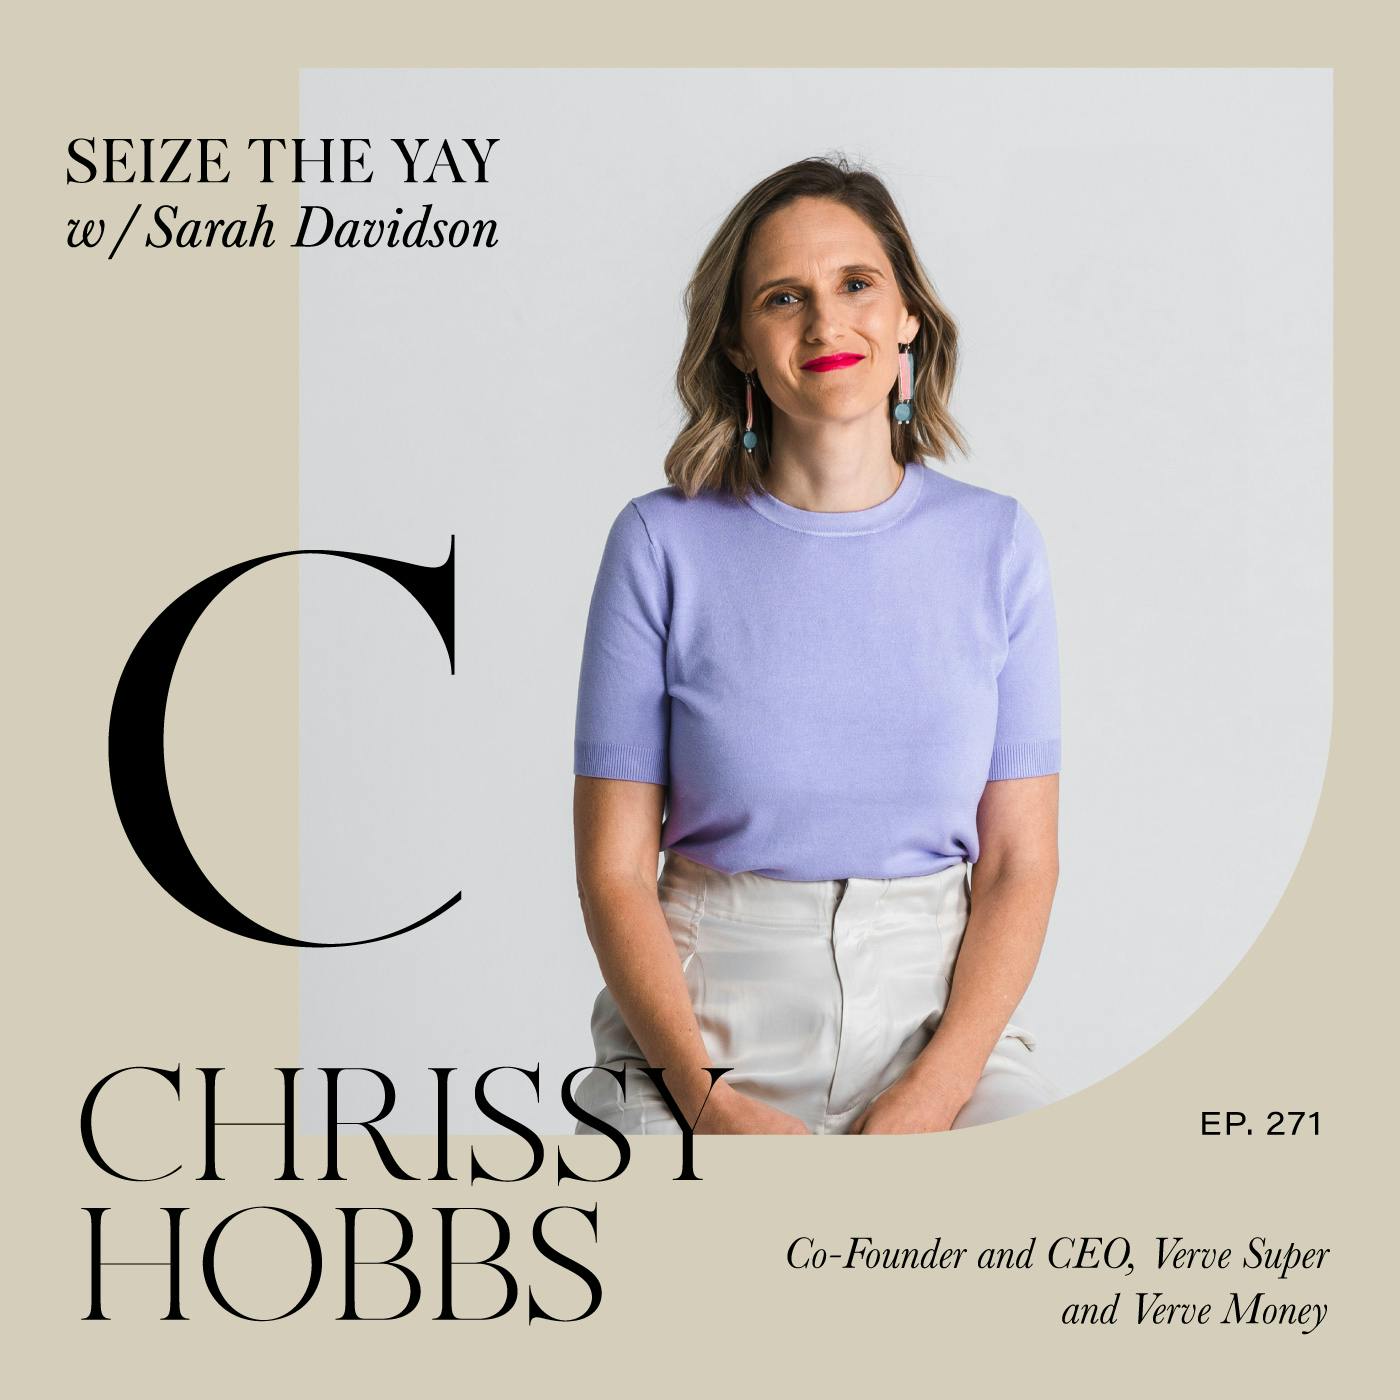 Chrissy Hobbs // From warzones to women’s superannuation... the inimitable CEO of Verve Super